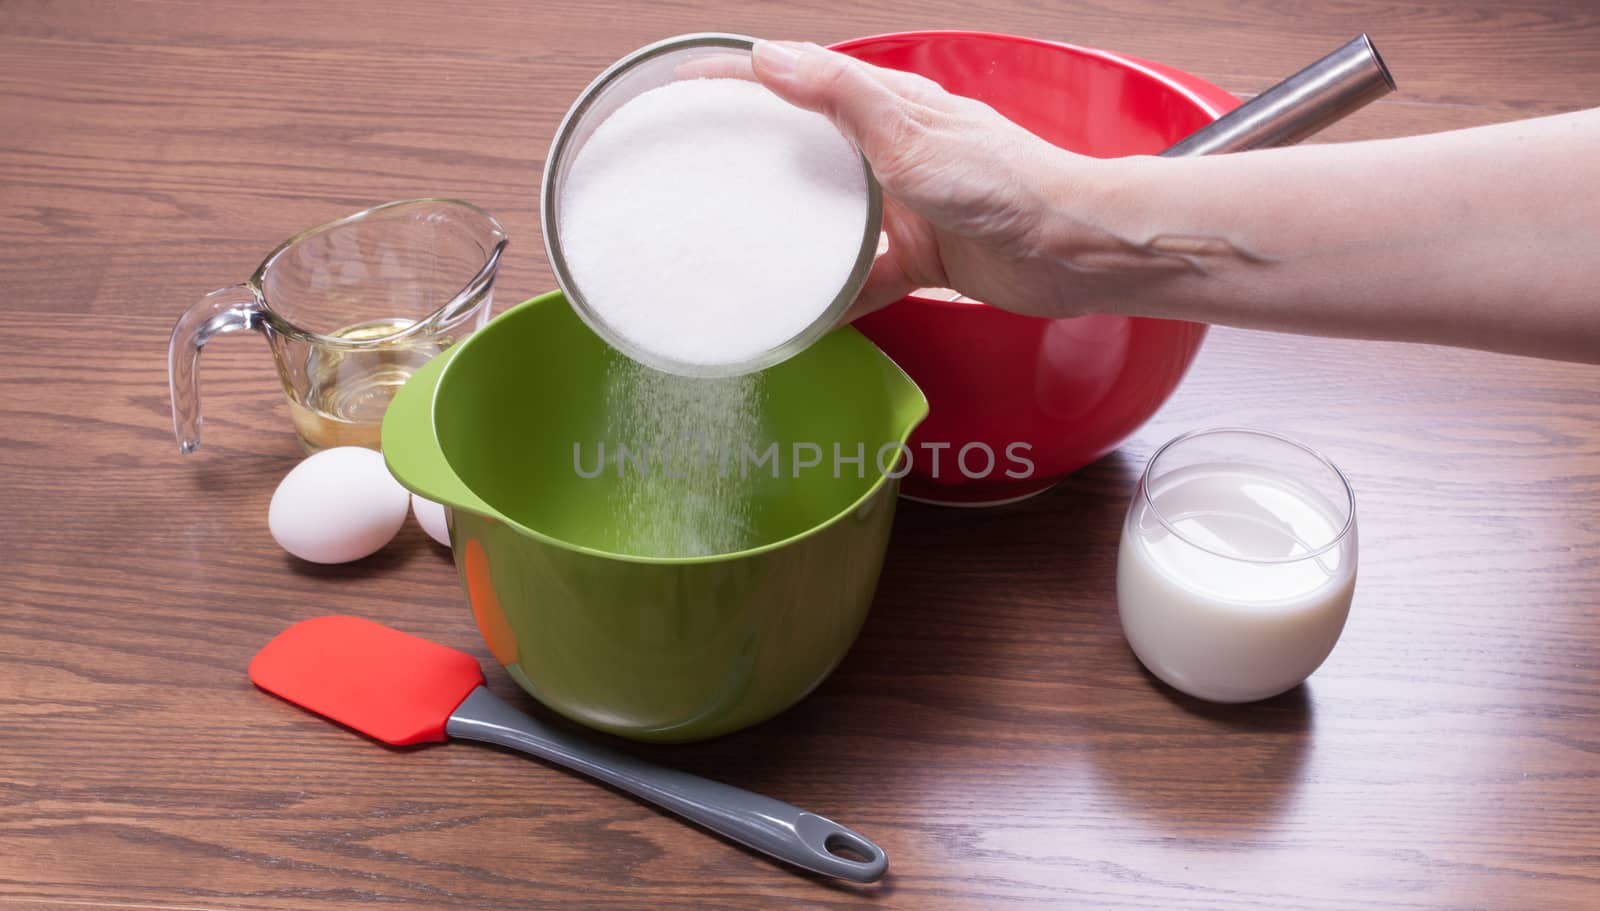 Pouring sugar in a bowl to cook a homemade cake from scratch